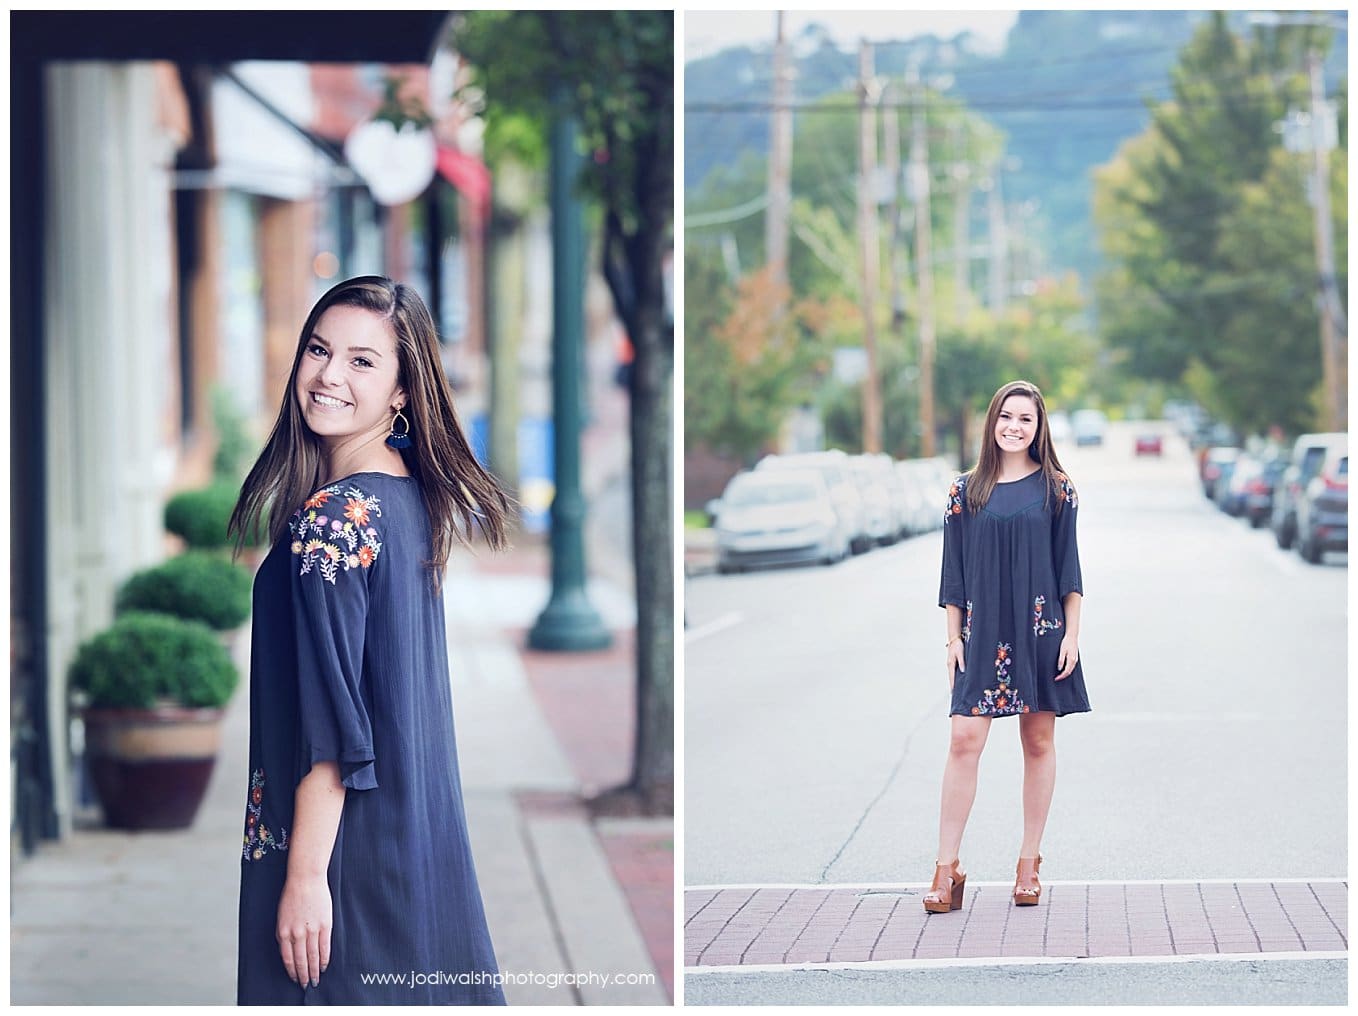 images of senior girl in gray dress on the street and sidewalk of Sewickley, Pennsylvania